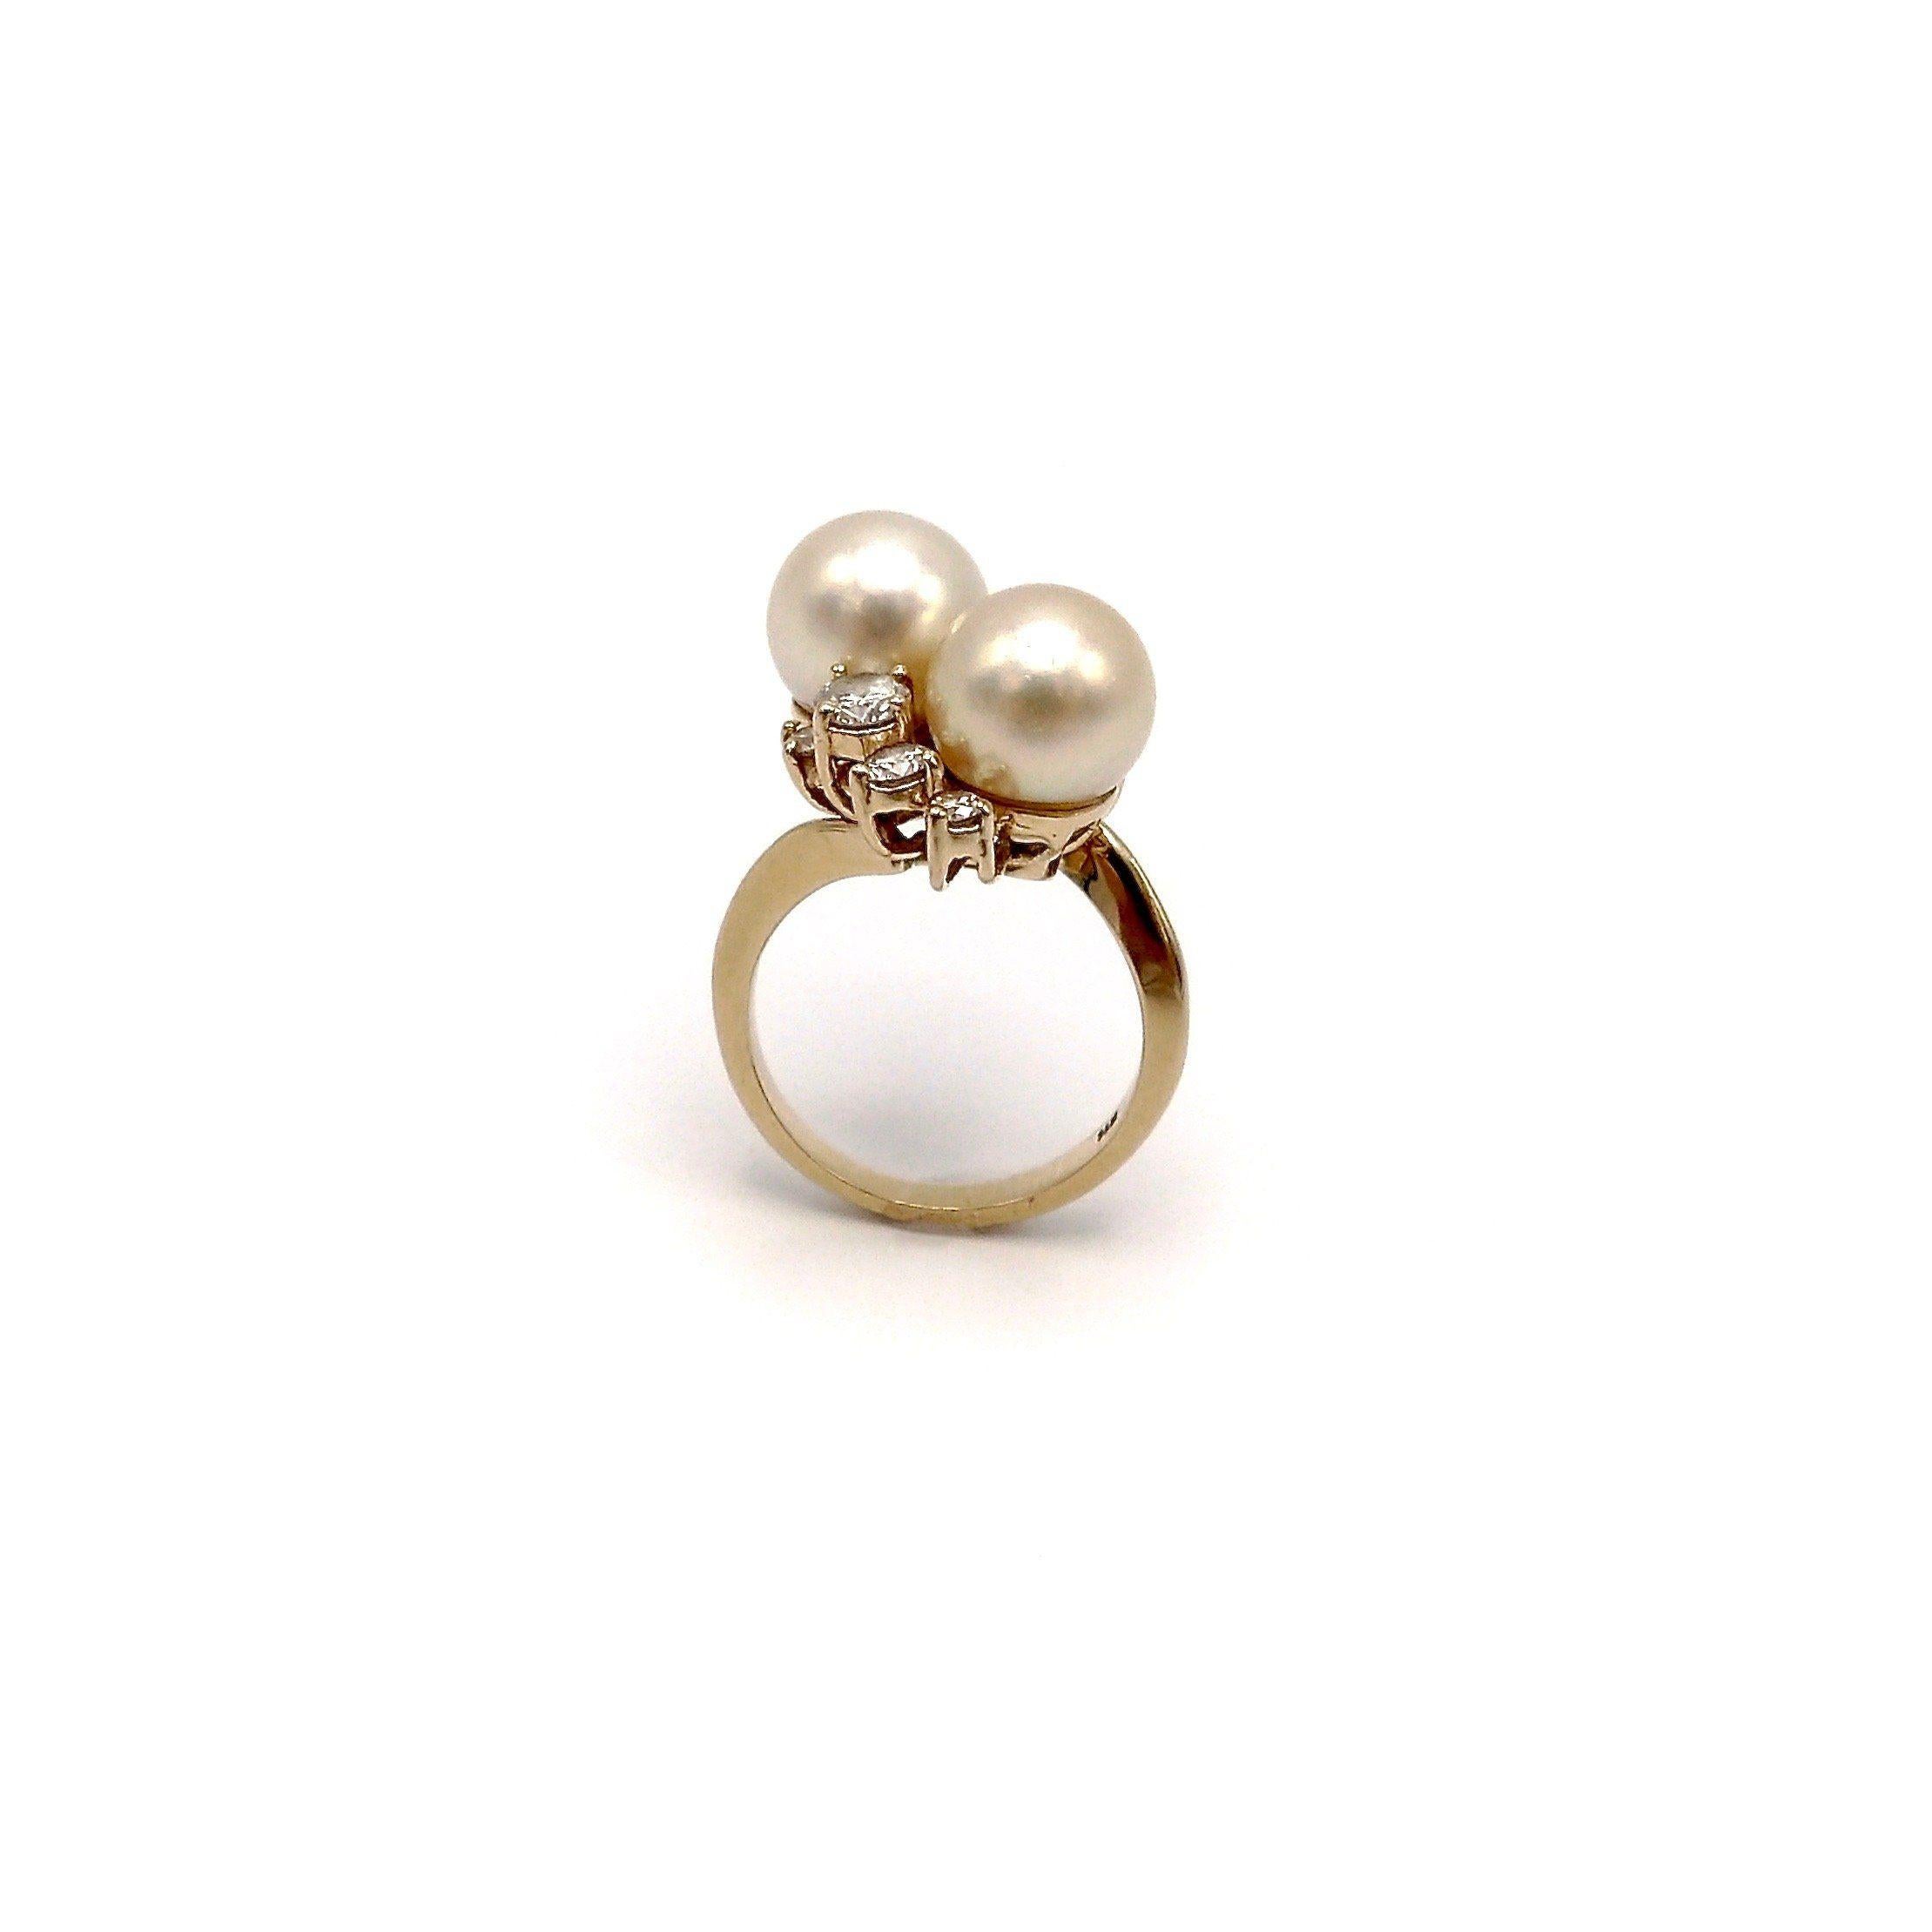 This stunning bypass ring features two cultured pearls and eight diamonds. The ring is made in the 1950's and has a classic and elegant style. Bypass rings such as this one were popularized in the Victorian era and quickly became the ideal ring for